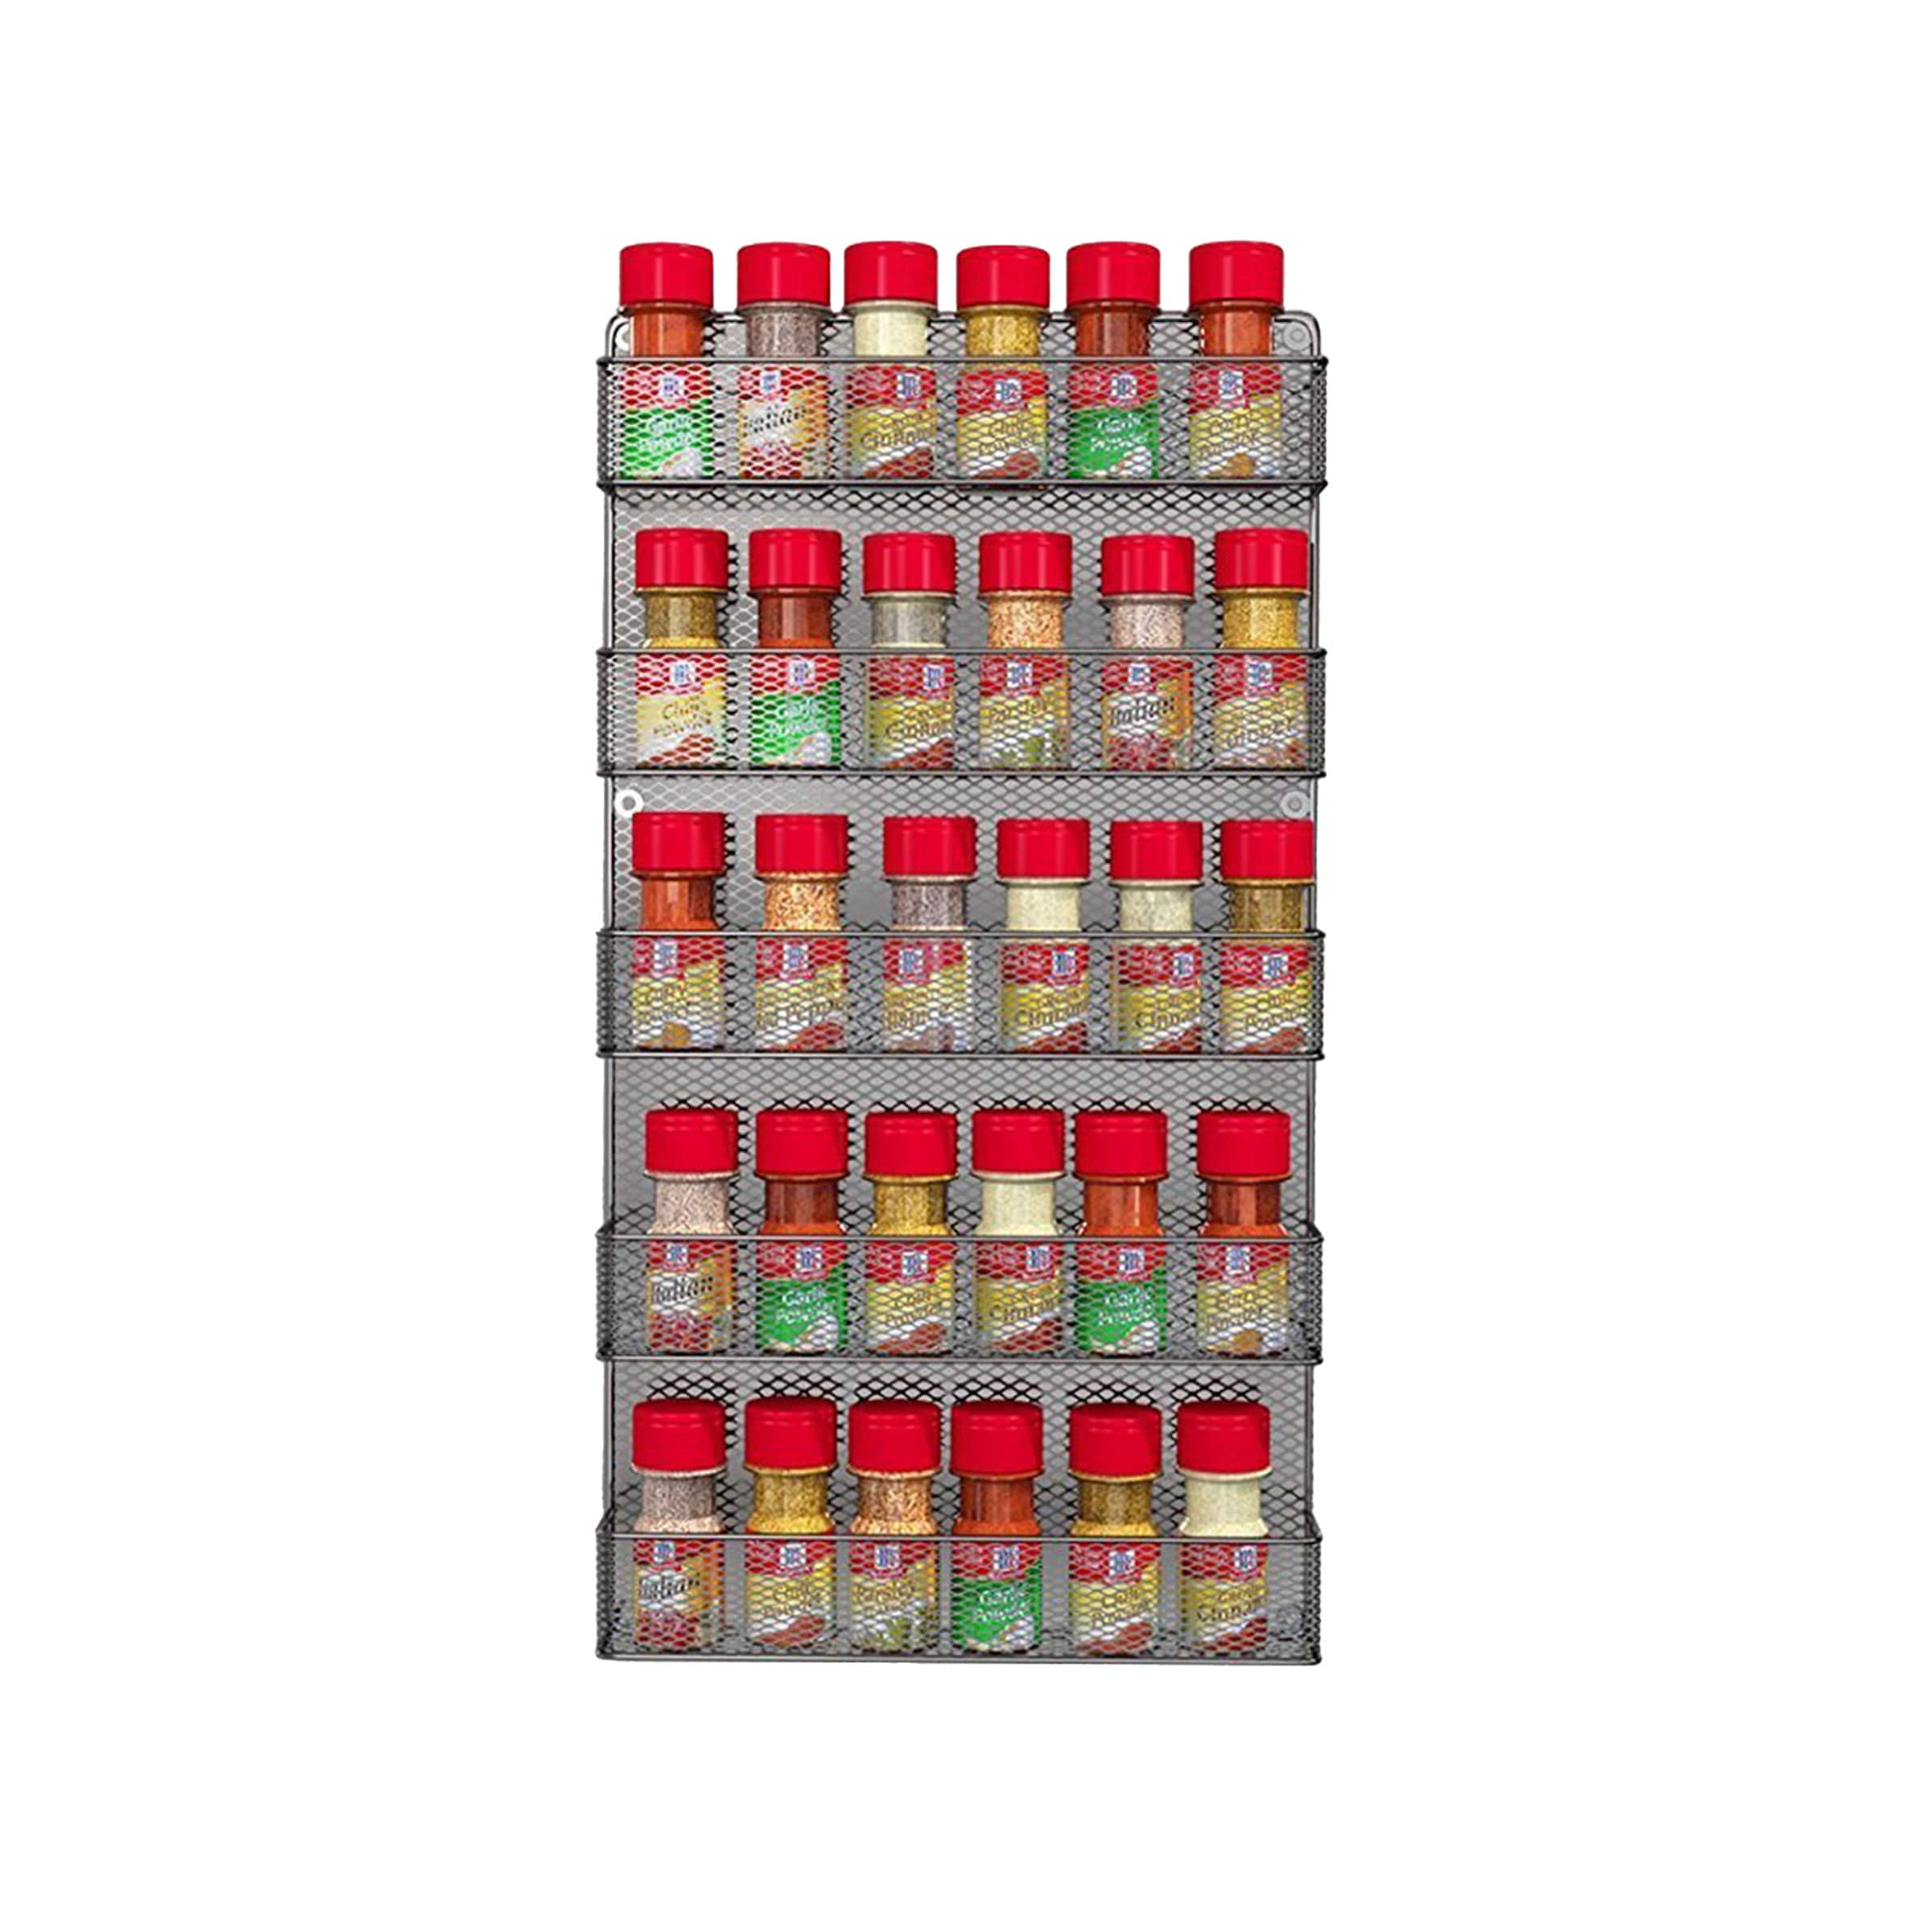 Drop down spice rack used as medicine organizer Or as a spice organizer  that I've never …